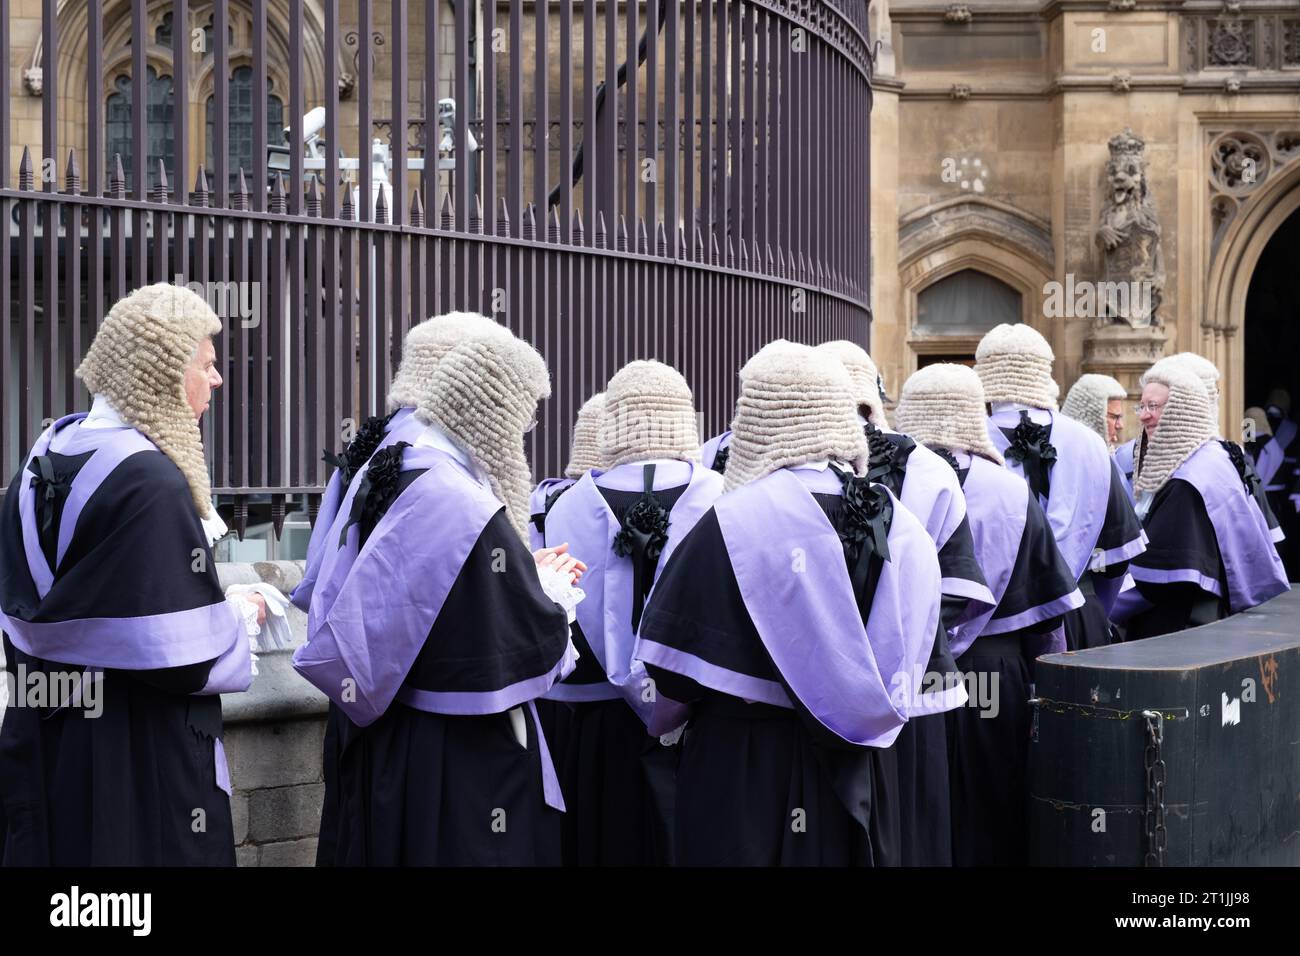 Lord Chancellor's Breakfast. Judges walk from Westminster Abbey to the House of Parliament, London UK. Stock Photo